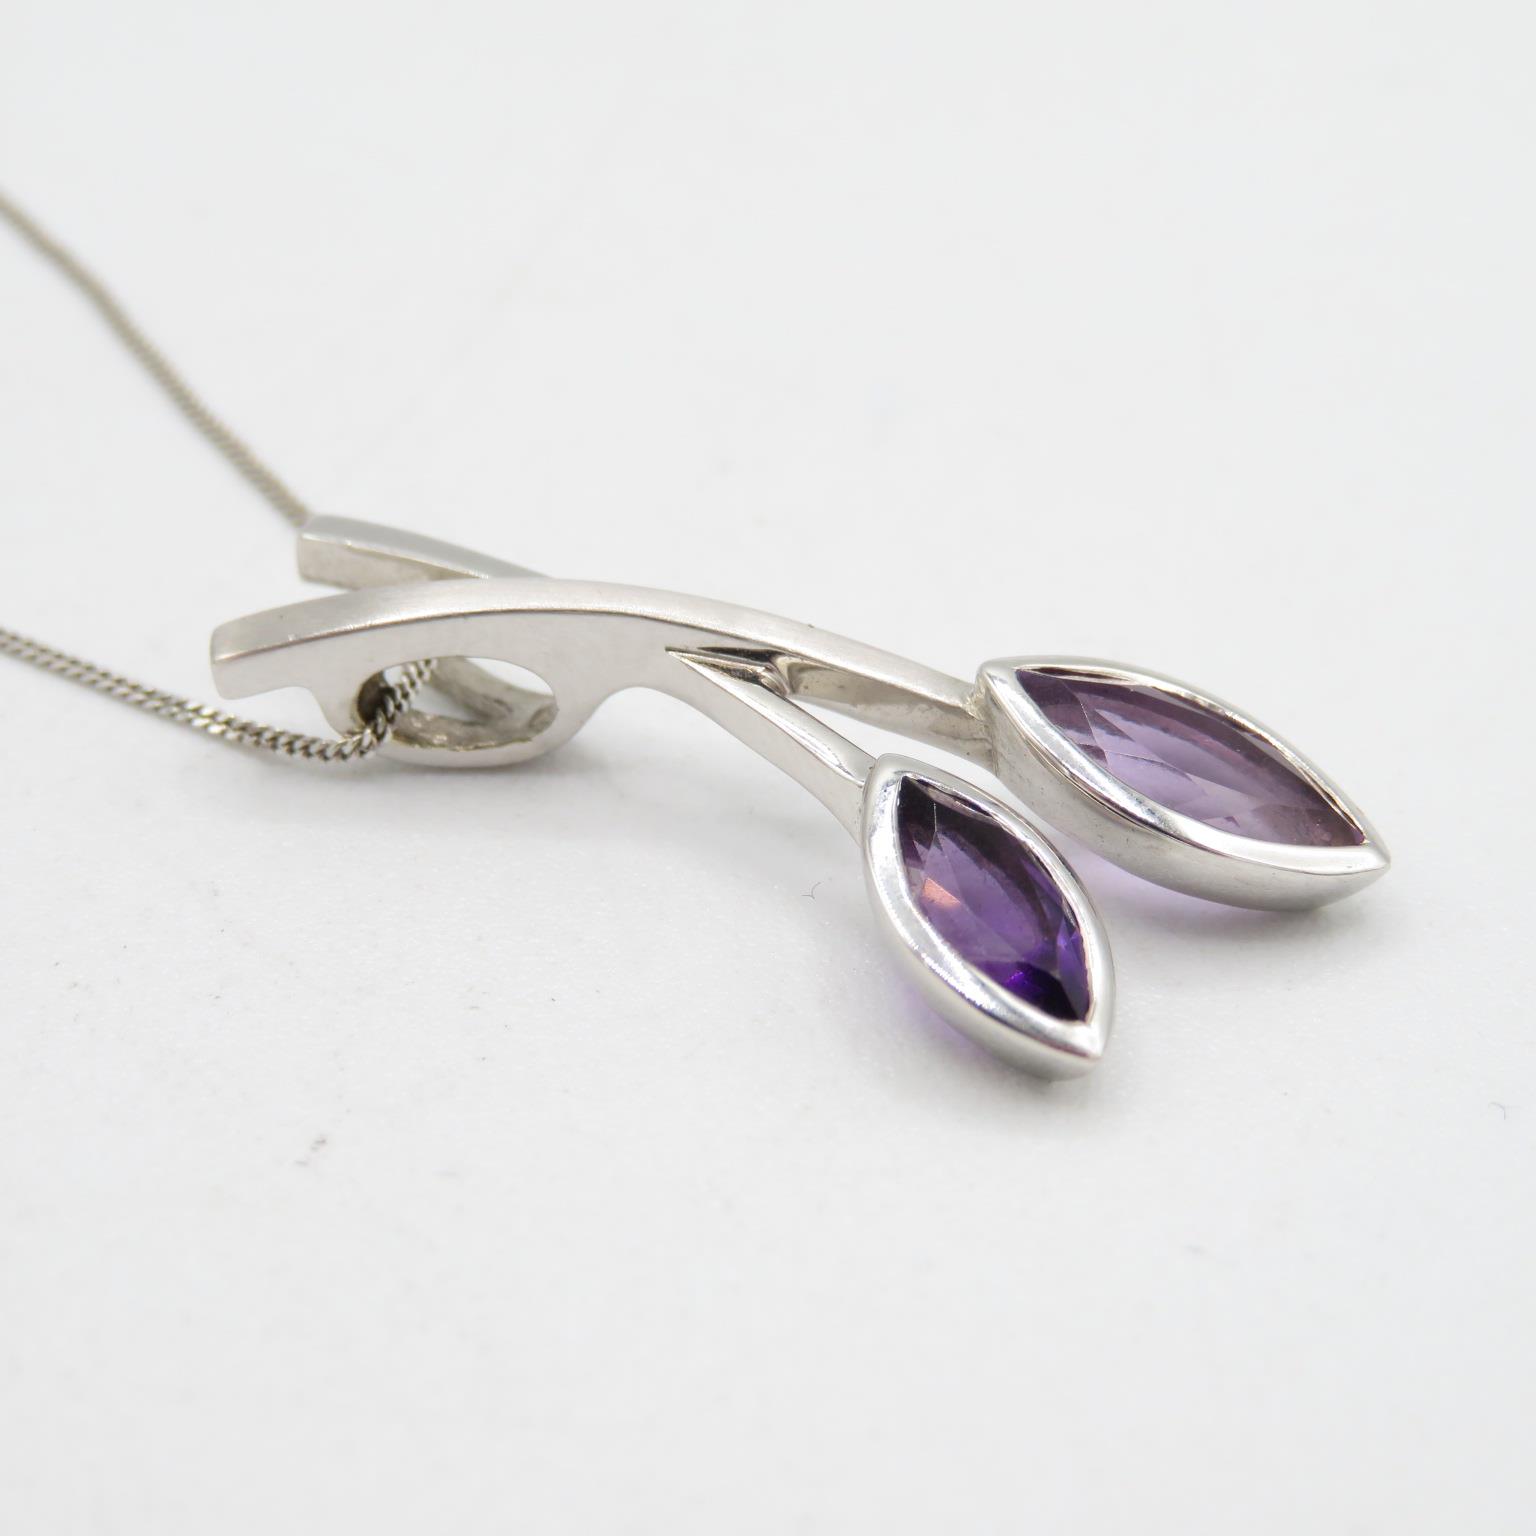 9ct white gold and amethyst pear drop pendant and chain - pendant measures 30mm long 3.6g - Bild 3 aus 5